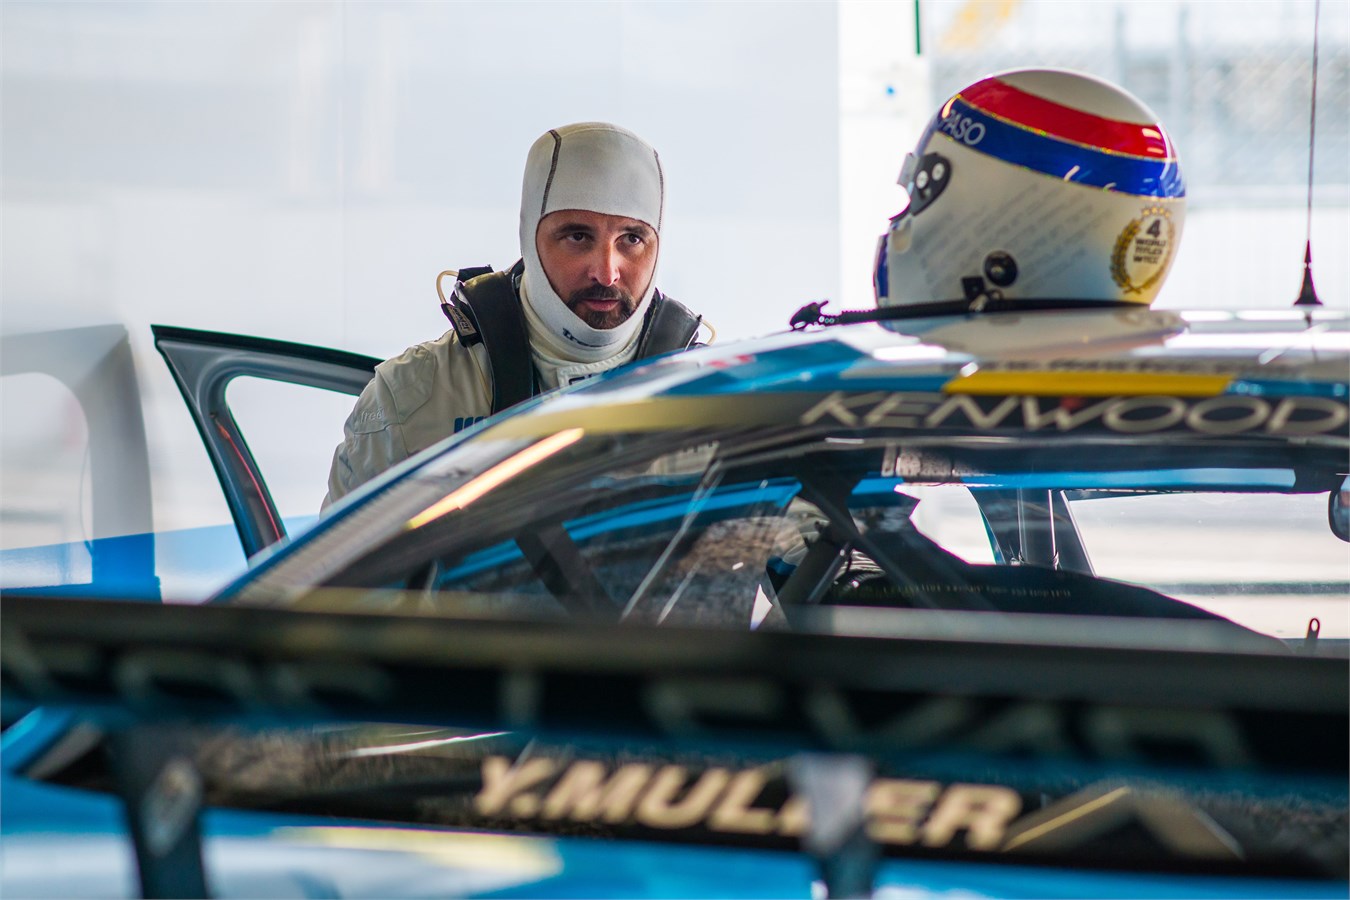 Thed Björk and Polestar Cyan Racing head to World Touring Car Championship finale with one mission – to win both driver and manufacturer titles